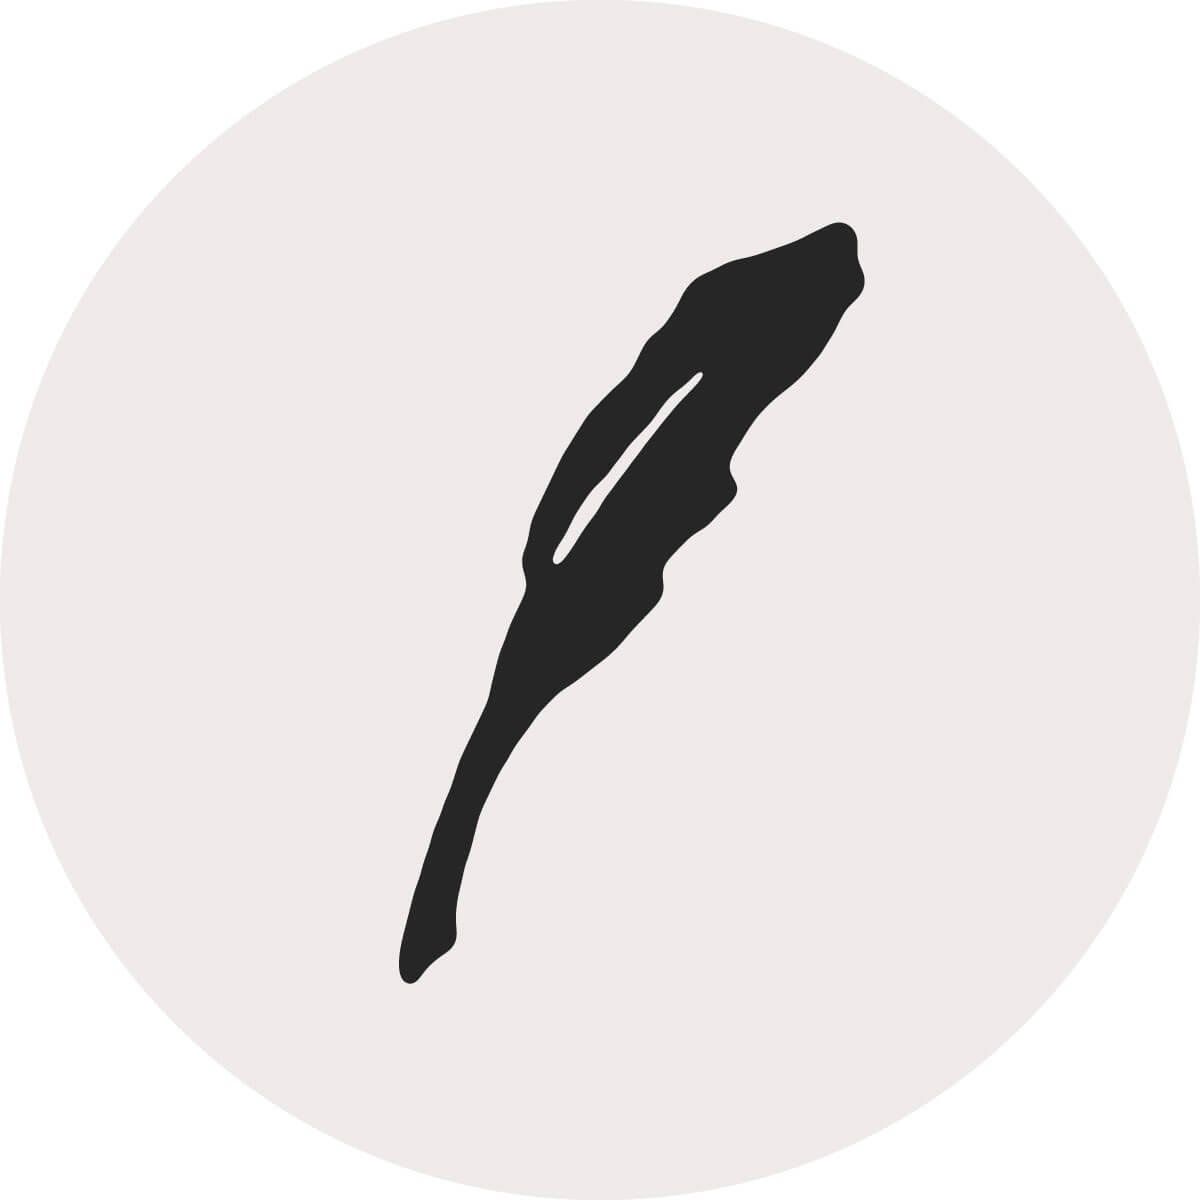 A black drawn image of a single feather quill positioned upright.